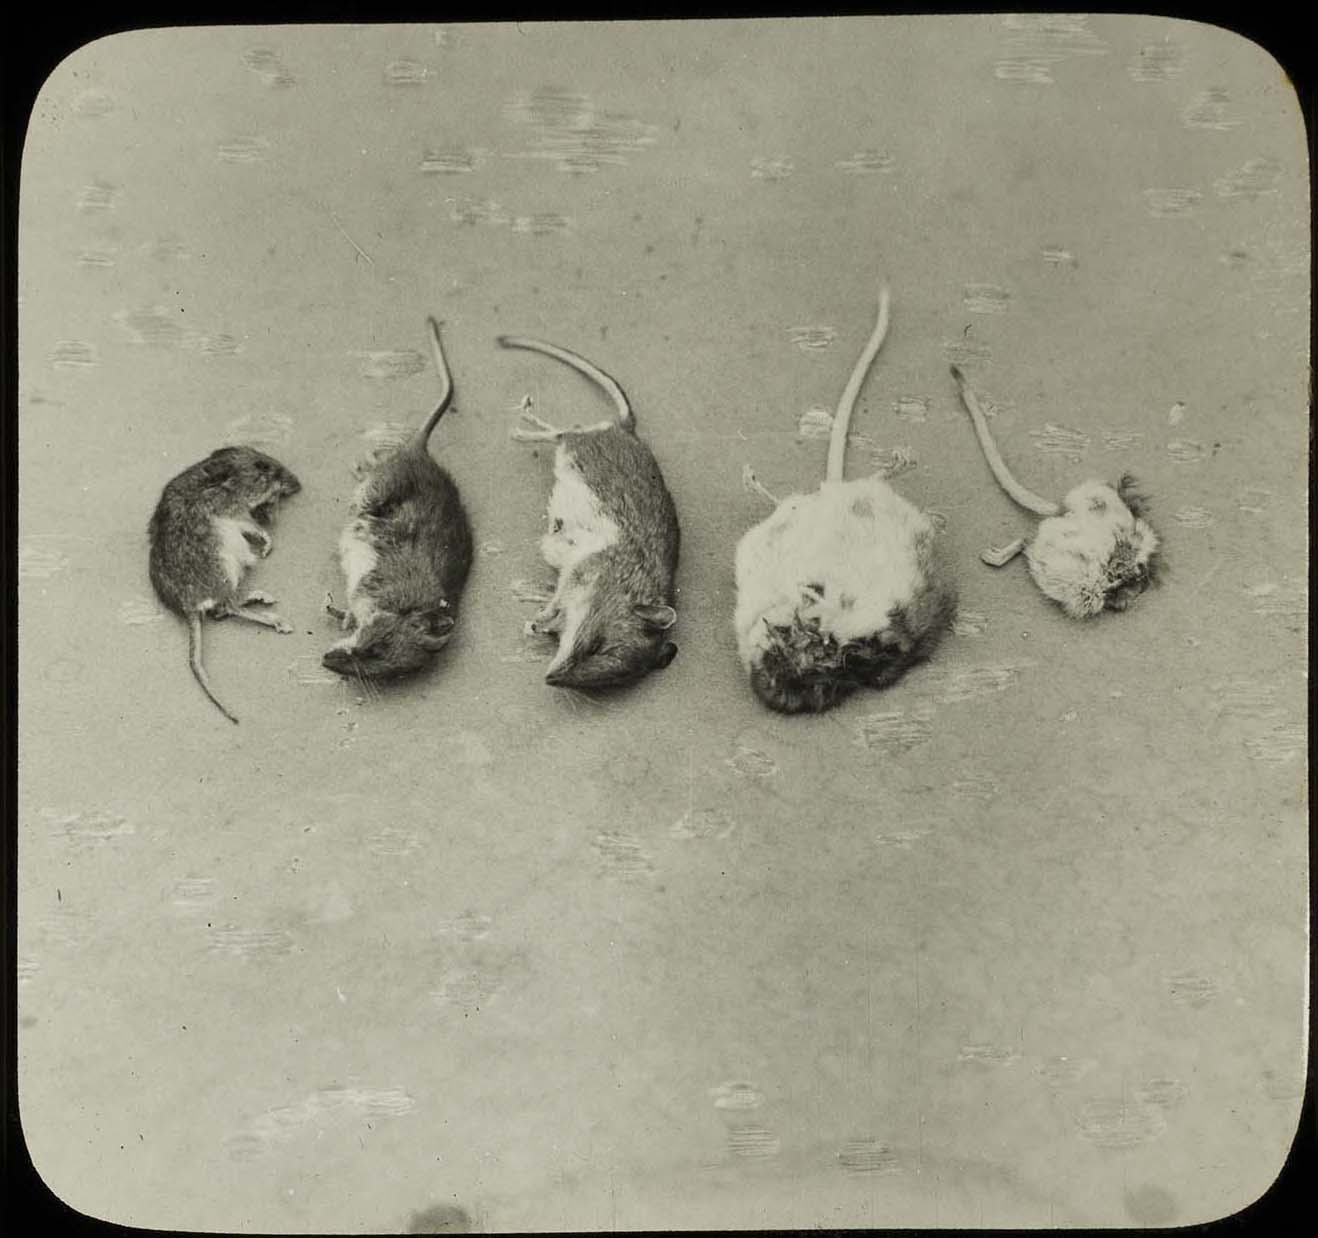 Lantern slide and photograph of mice found in Screech Owl nest